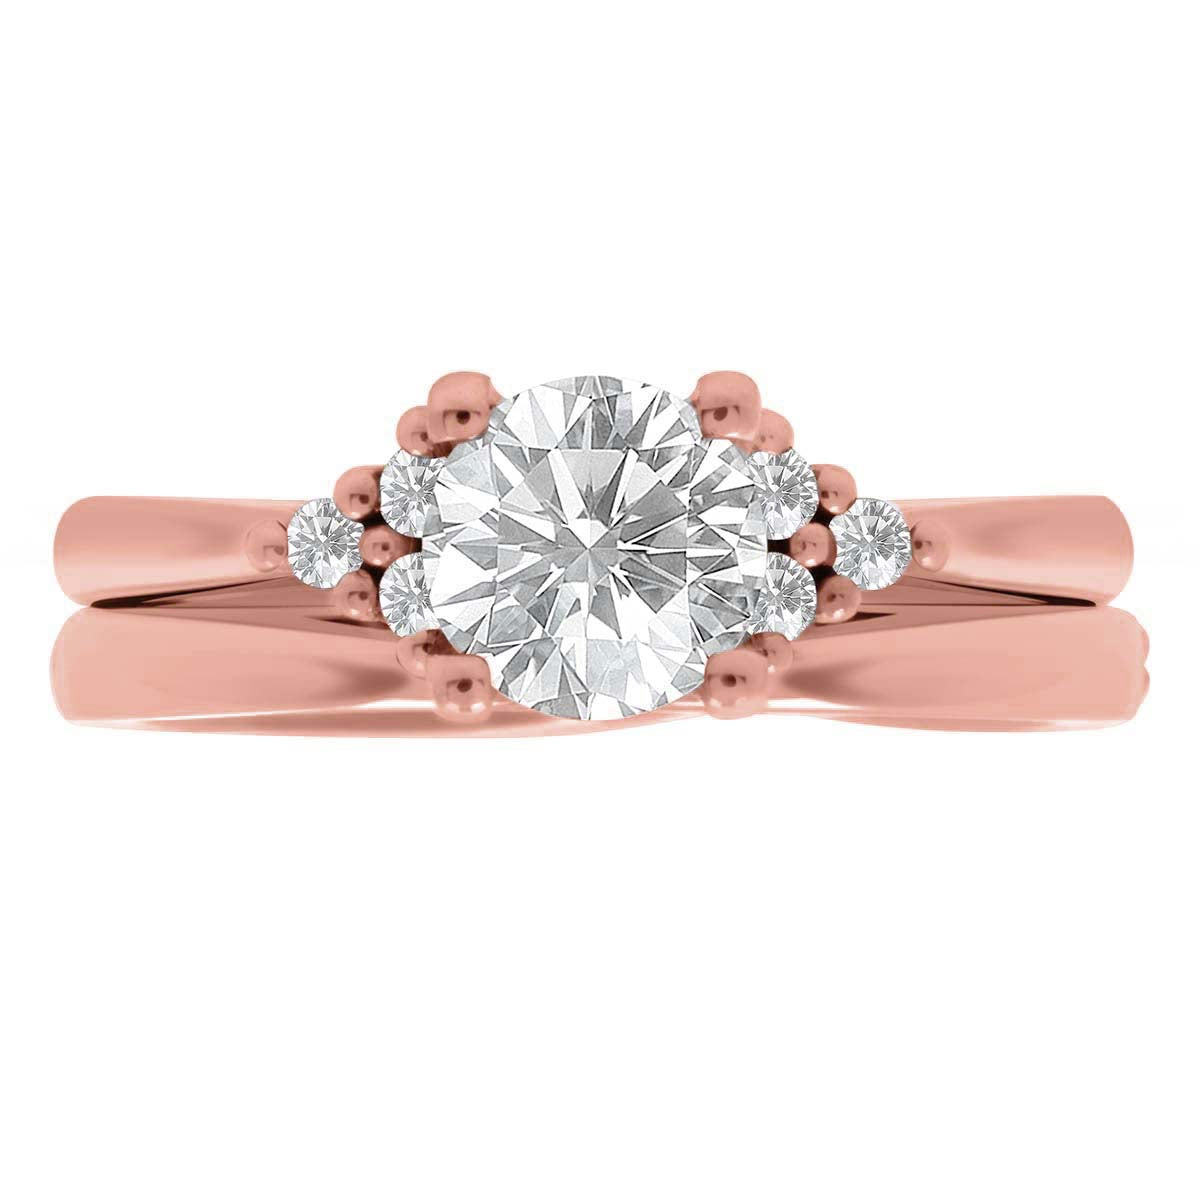 Handmade Engagement Ring in rose gold with a plain wedding ring